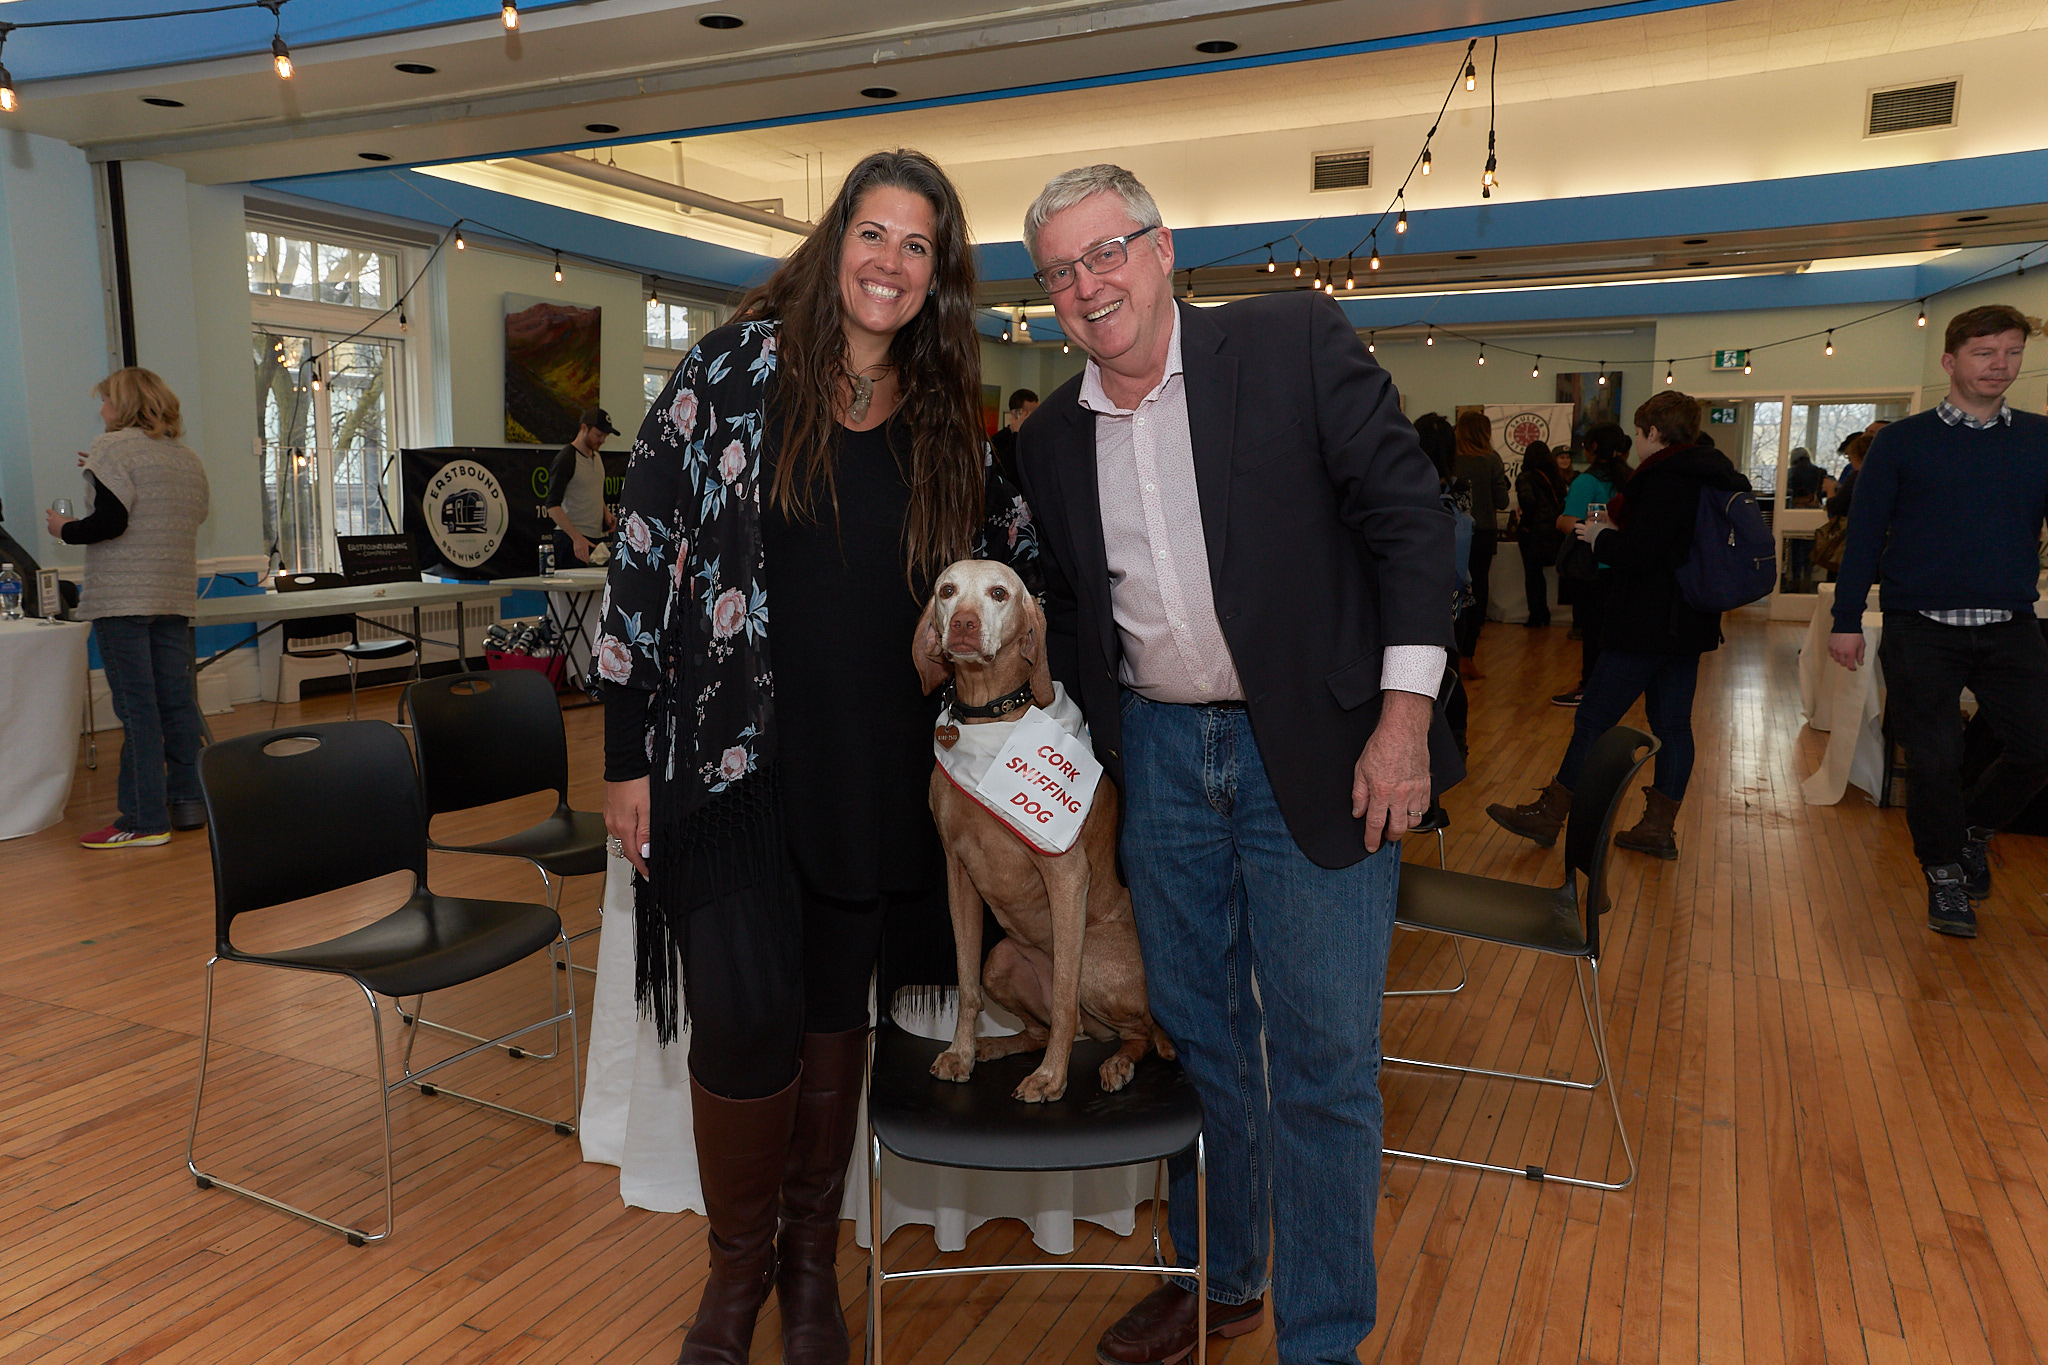 Apr 7th Riverside Wine &amp; Craft Beer Expo 2018 -Megan from Sponsor Team Sheppard Re/MAX Hallmark and John from the Ralph Thornton Community Centre - with Copper at middle (photo: PAWELECPhoto)